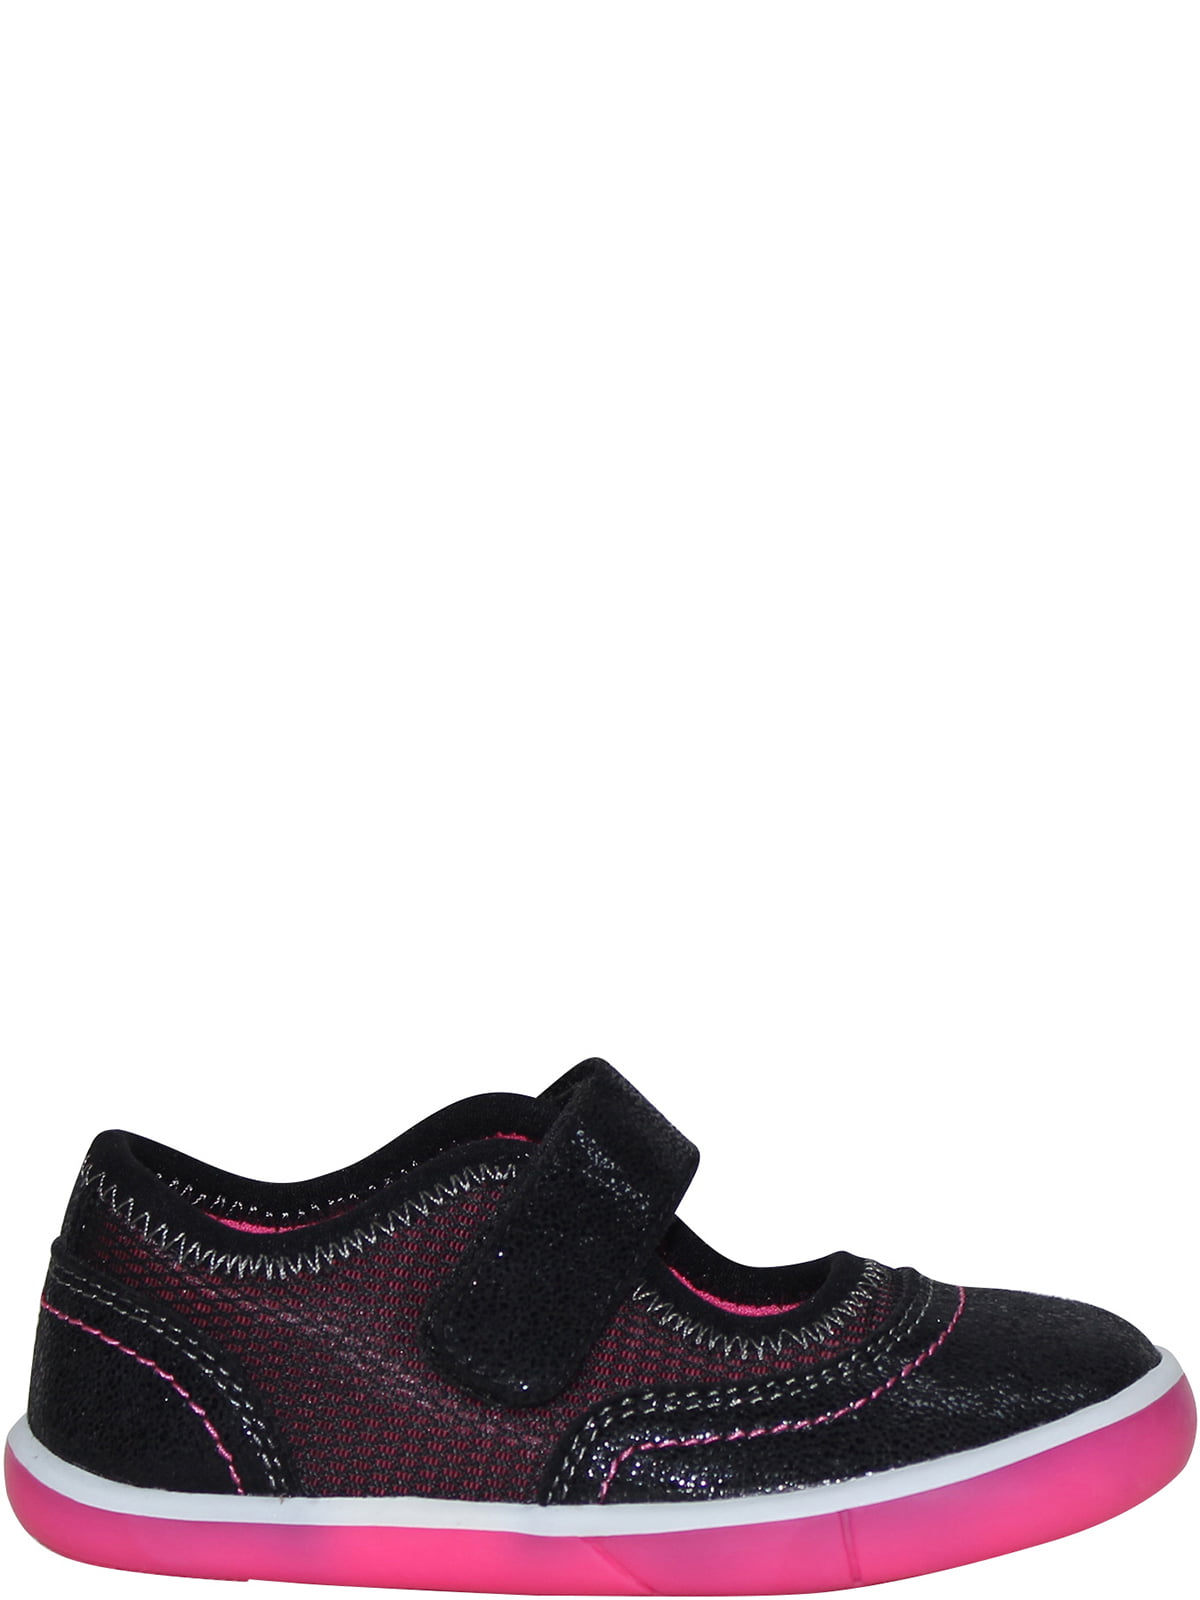 Wonder Nation Toddler filles Athletic Mary Jane Chaussures Noir & Rose Taille 10 NEUF 